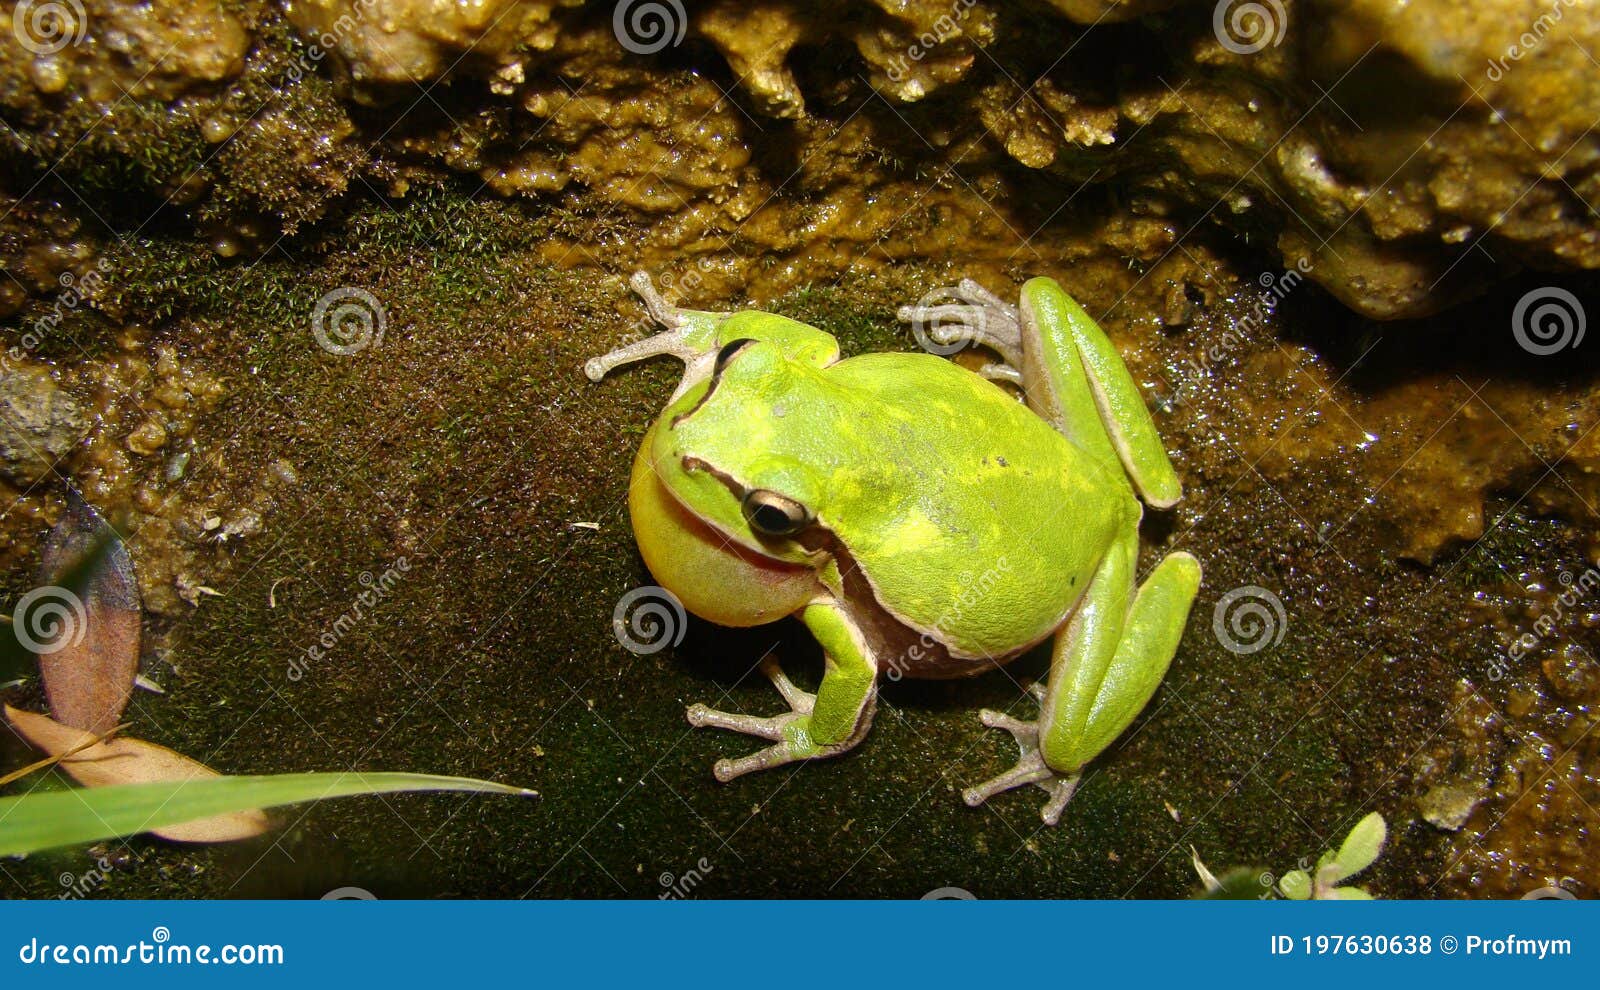 frog in the nature green tree frog in the swamp at night close up of frog chirp closeup of frog sing cute animal, beautiful animal